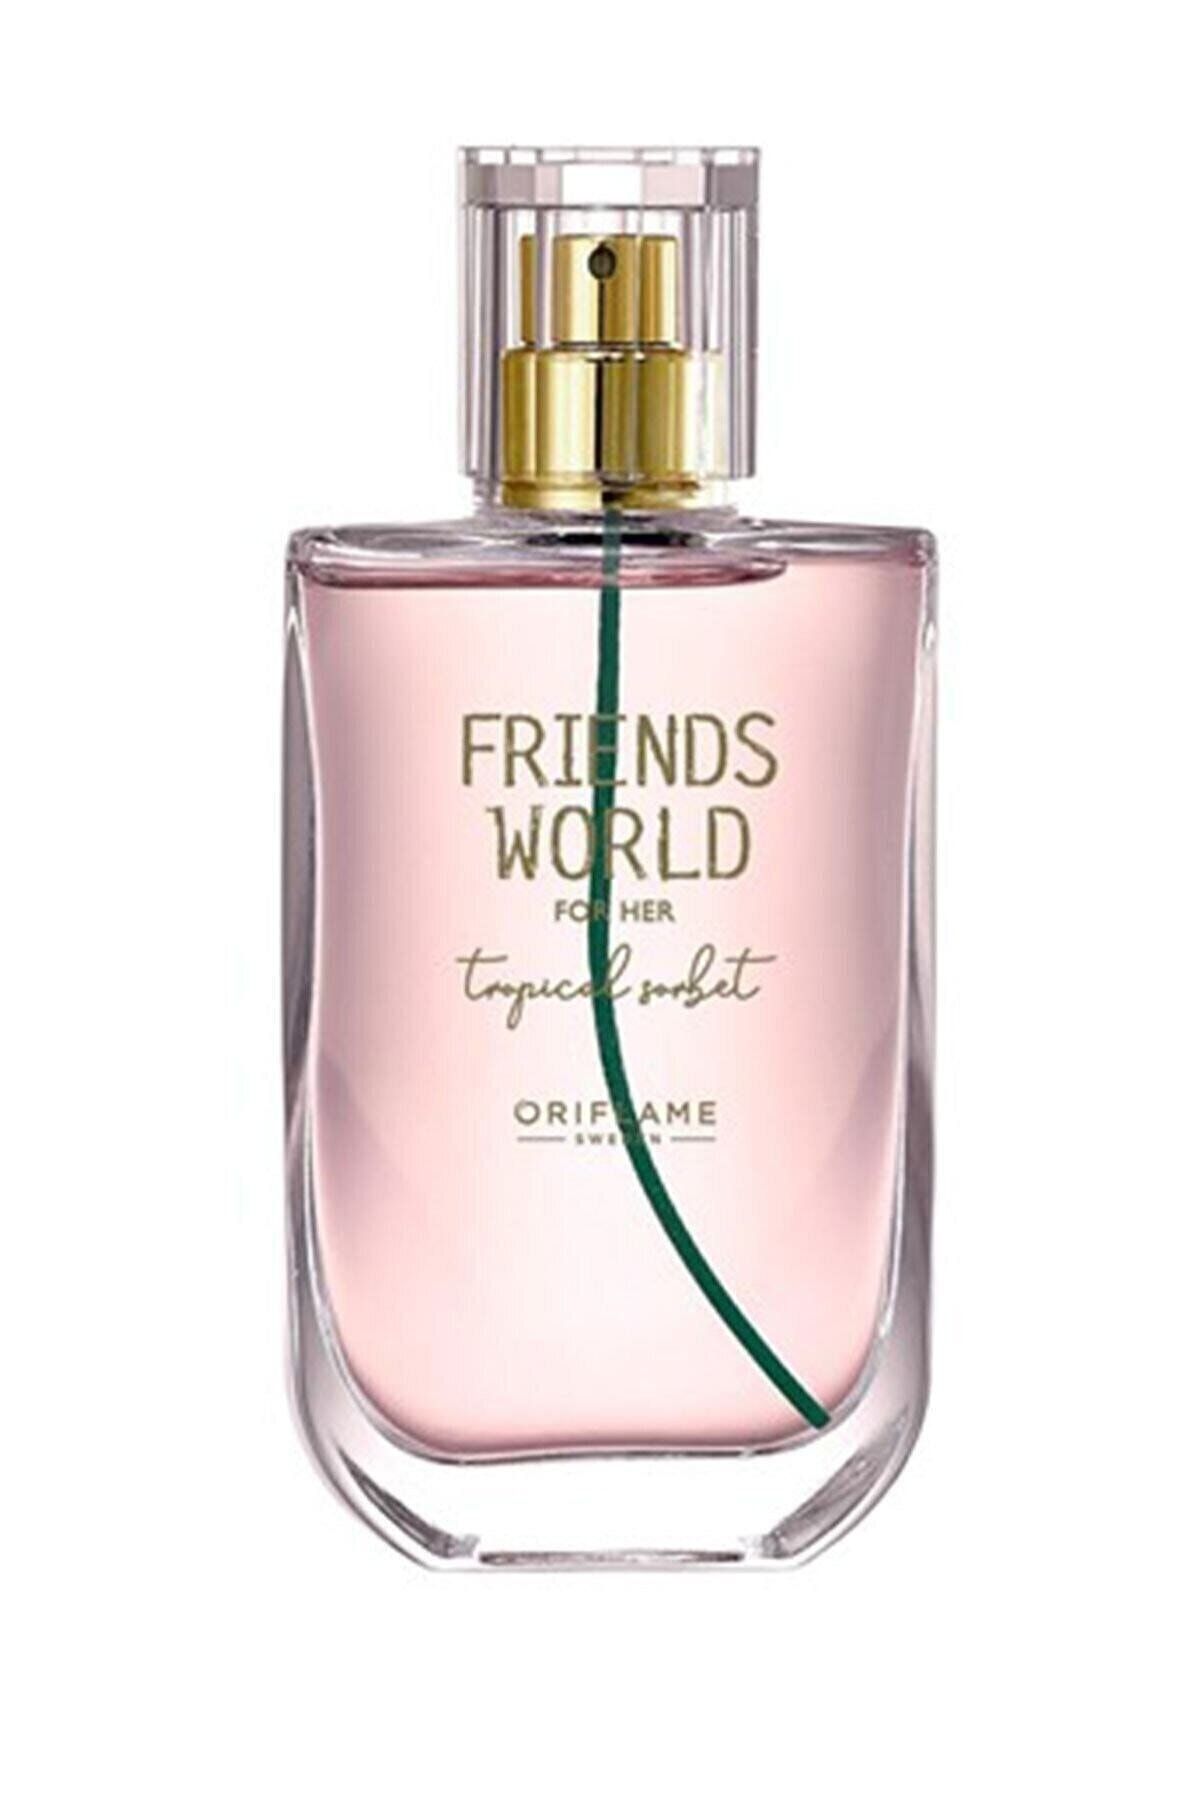 Oriflame Friends World For Her Tropical Sorbet 50 Ml.